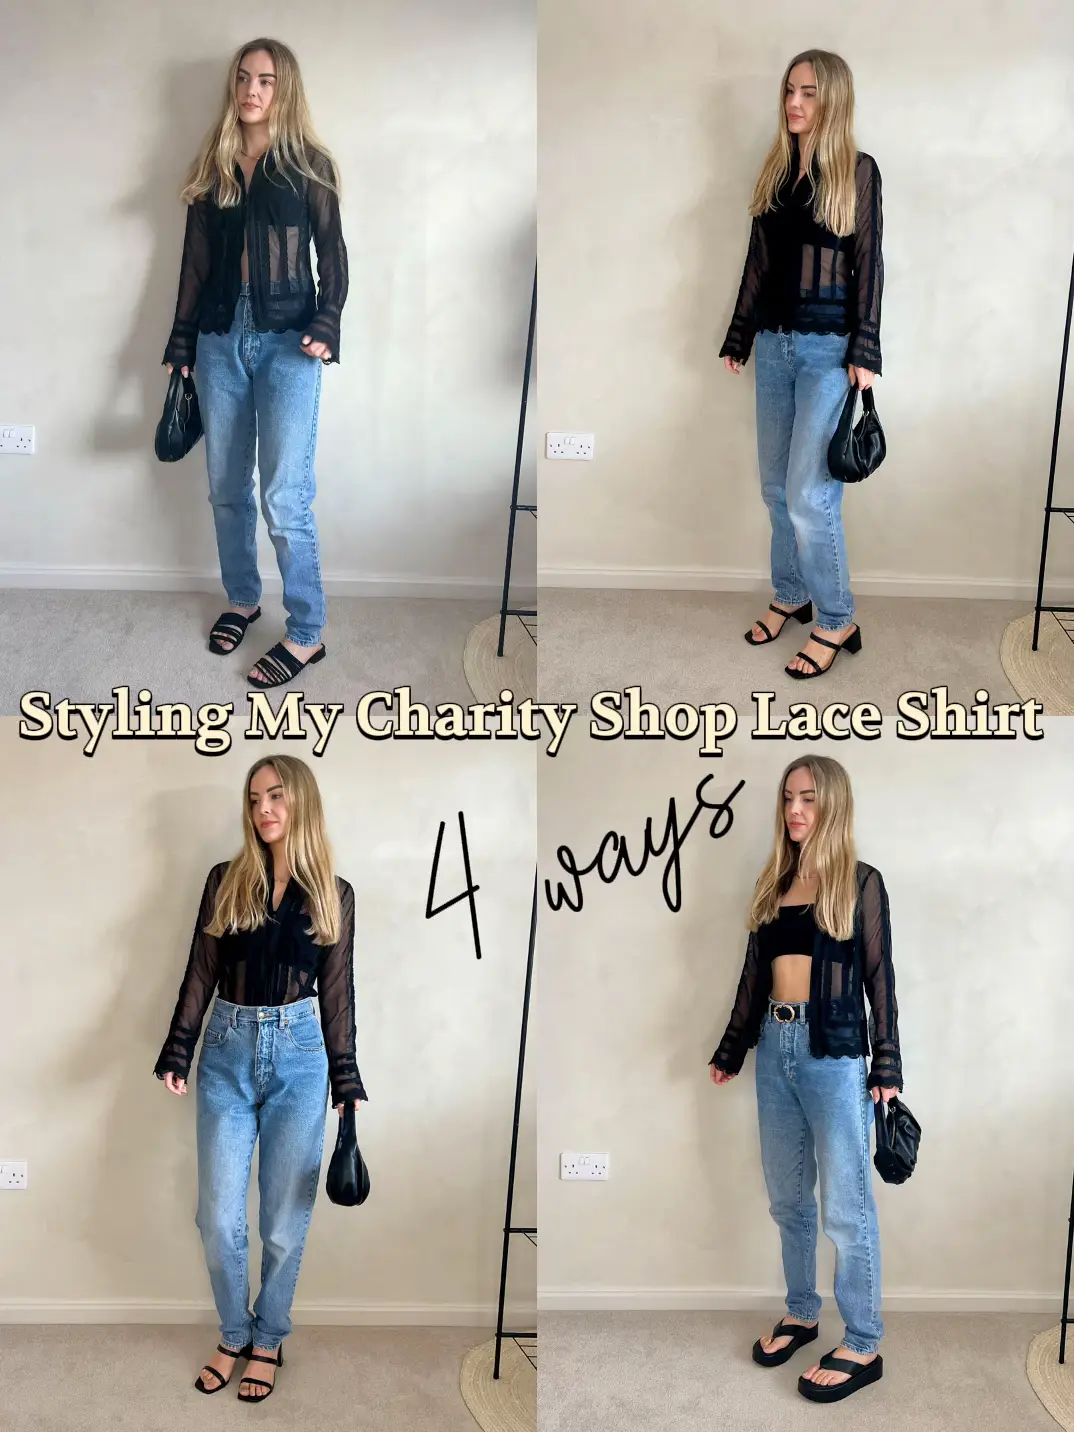 How to Style Mesh Tops, Gallery posted by nataliebrekka